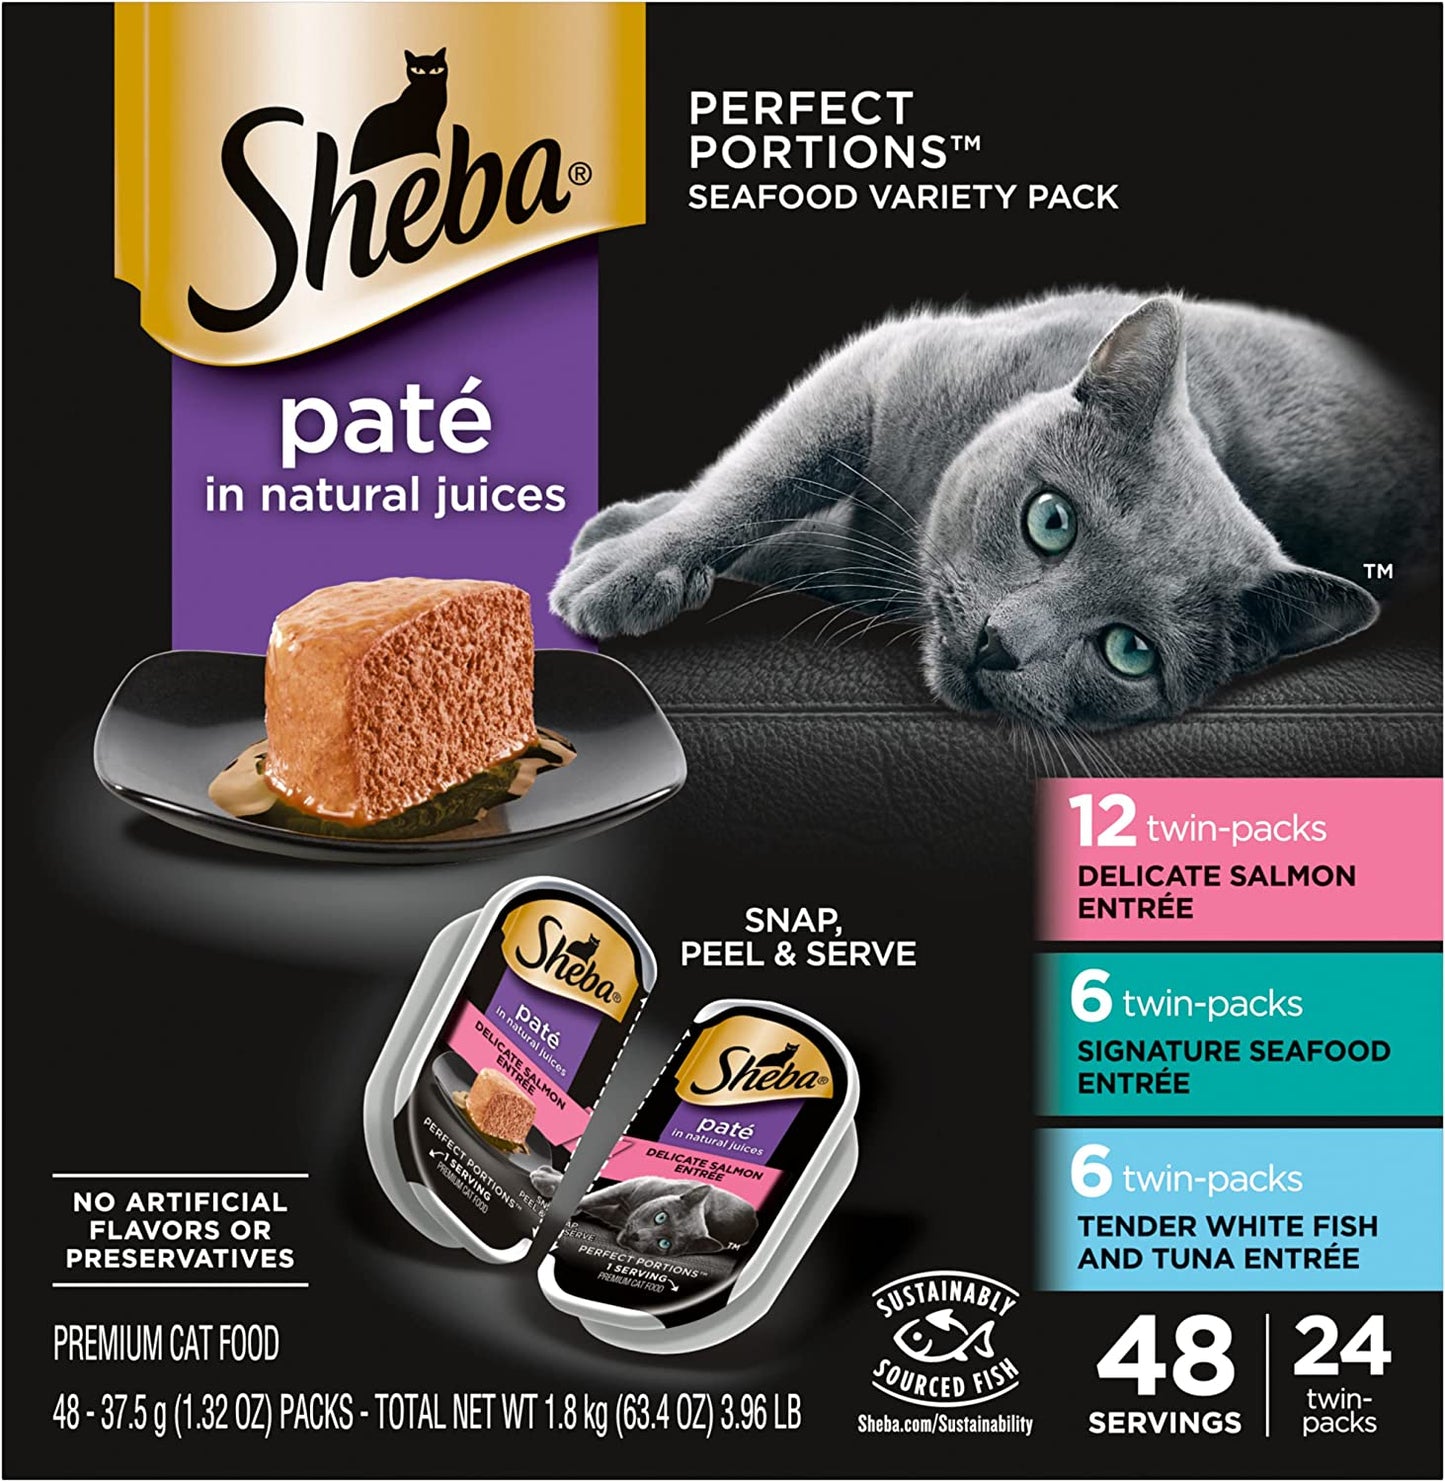 PERFECT PORTIONS Paté Adult Wet Cat Food Trays (24 Count, 48 Servings), Signature Seafood Entrée, Easy Peel Twin-Pack Trays